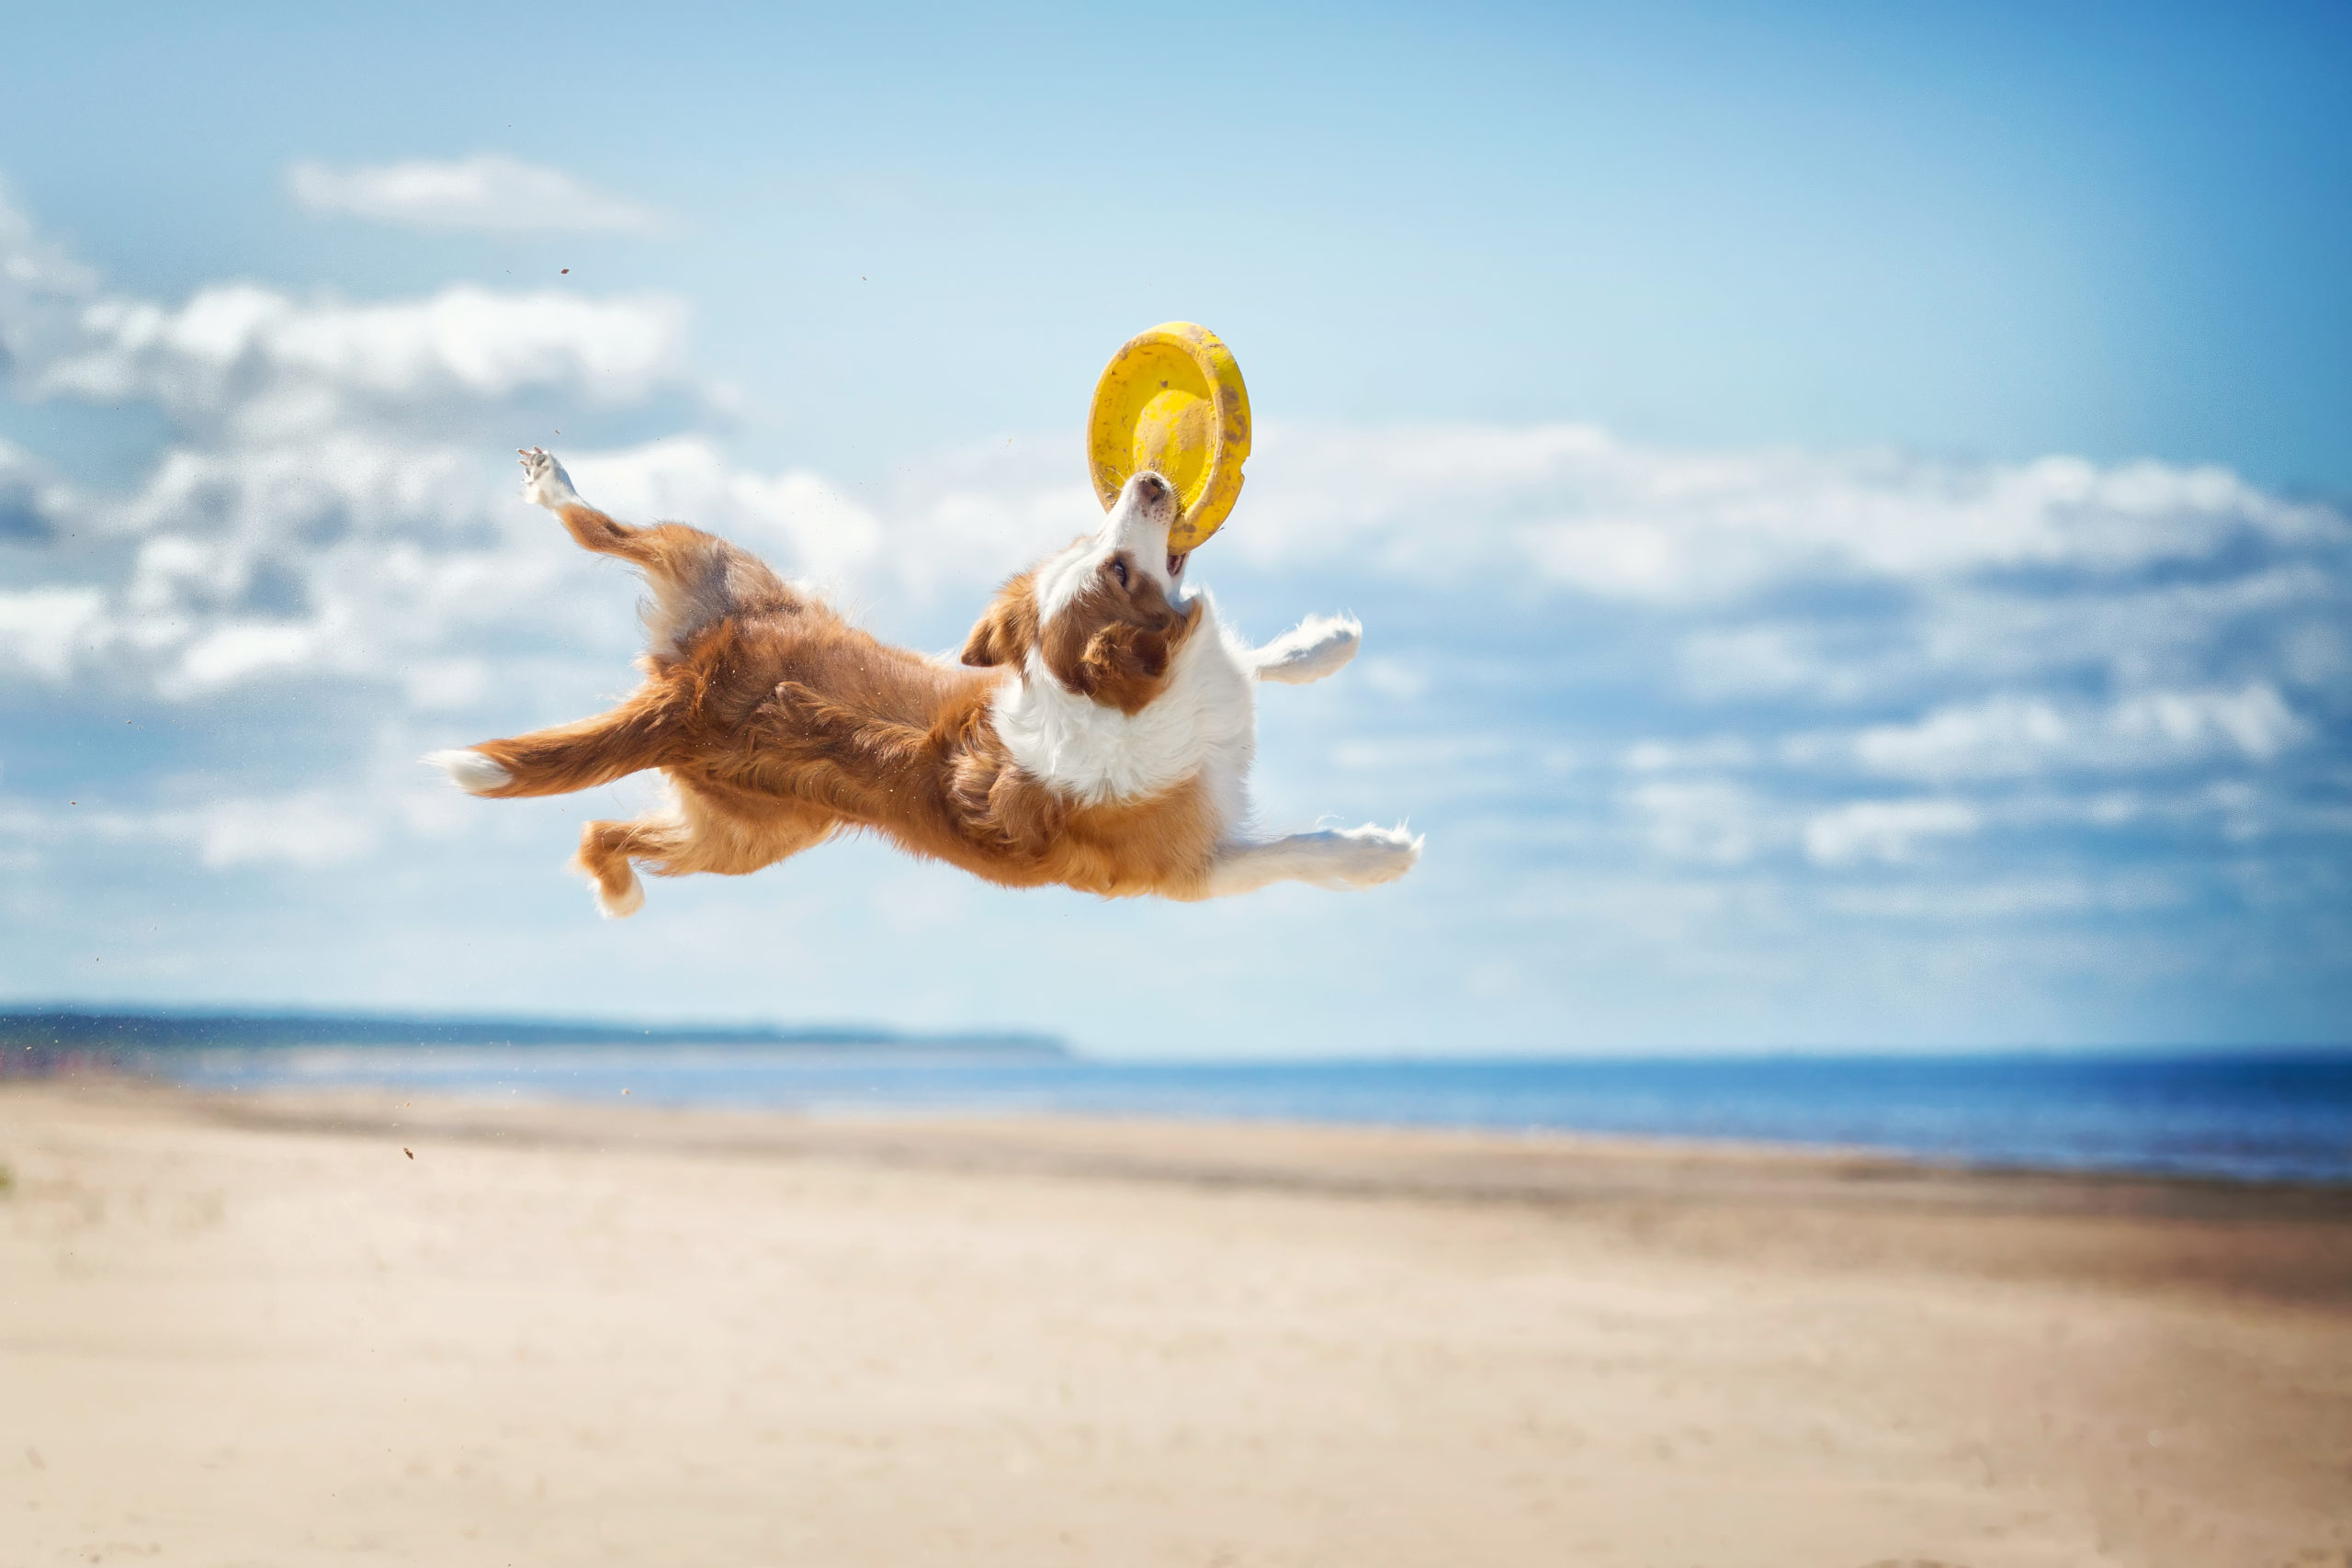 Dog-jumping-for-frisbee-on-beach-scaled.jpg